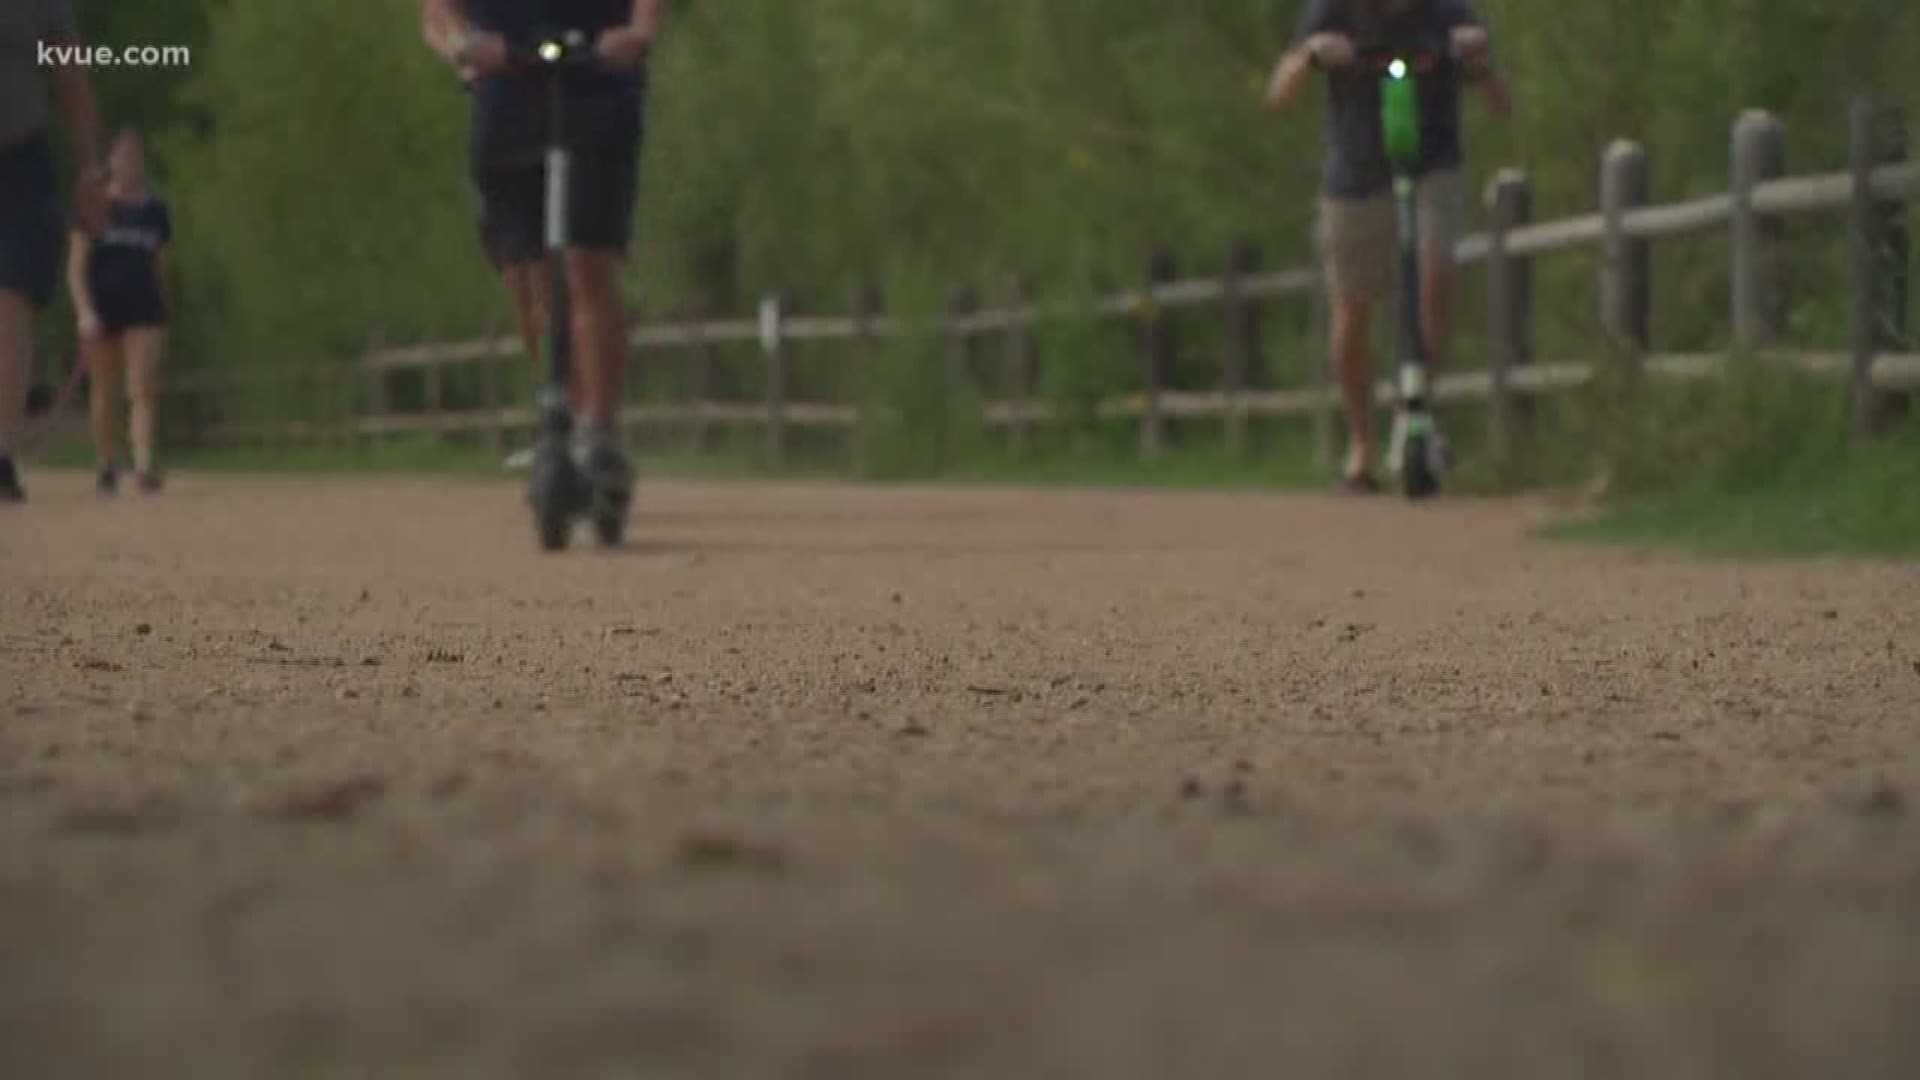 Austinites can expect hundreds of people riding dockless scooters and bikes into the festival to avoid traffic.